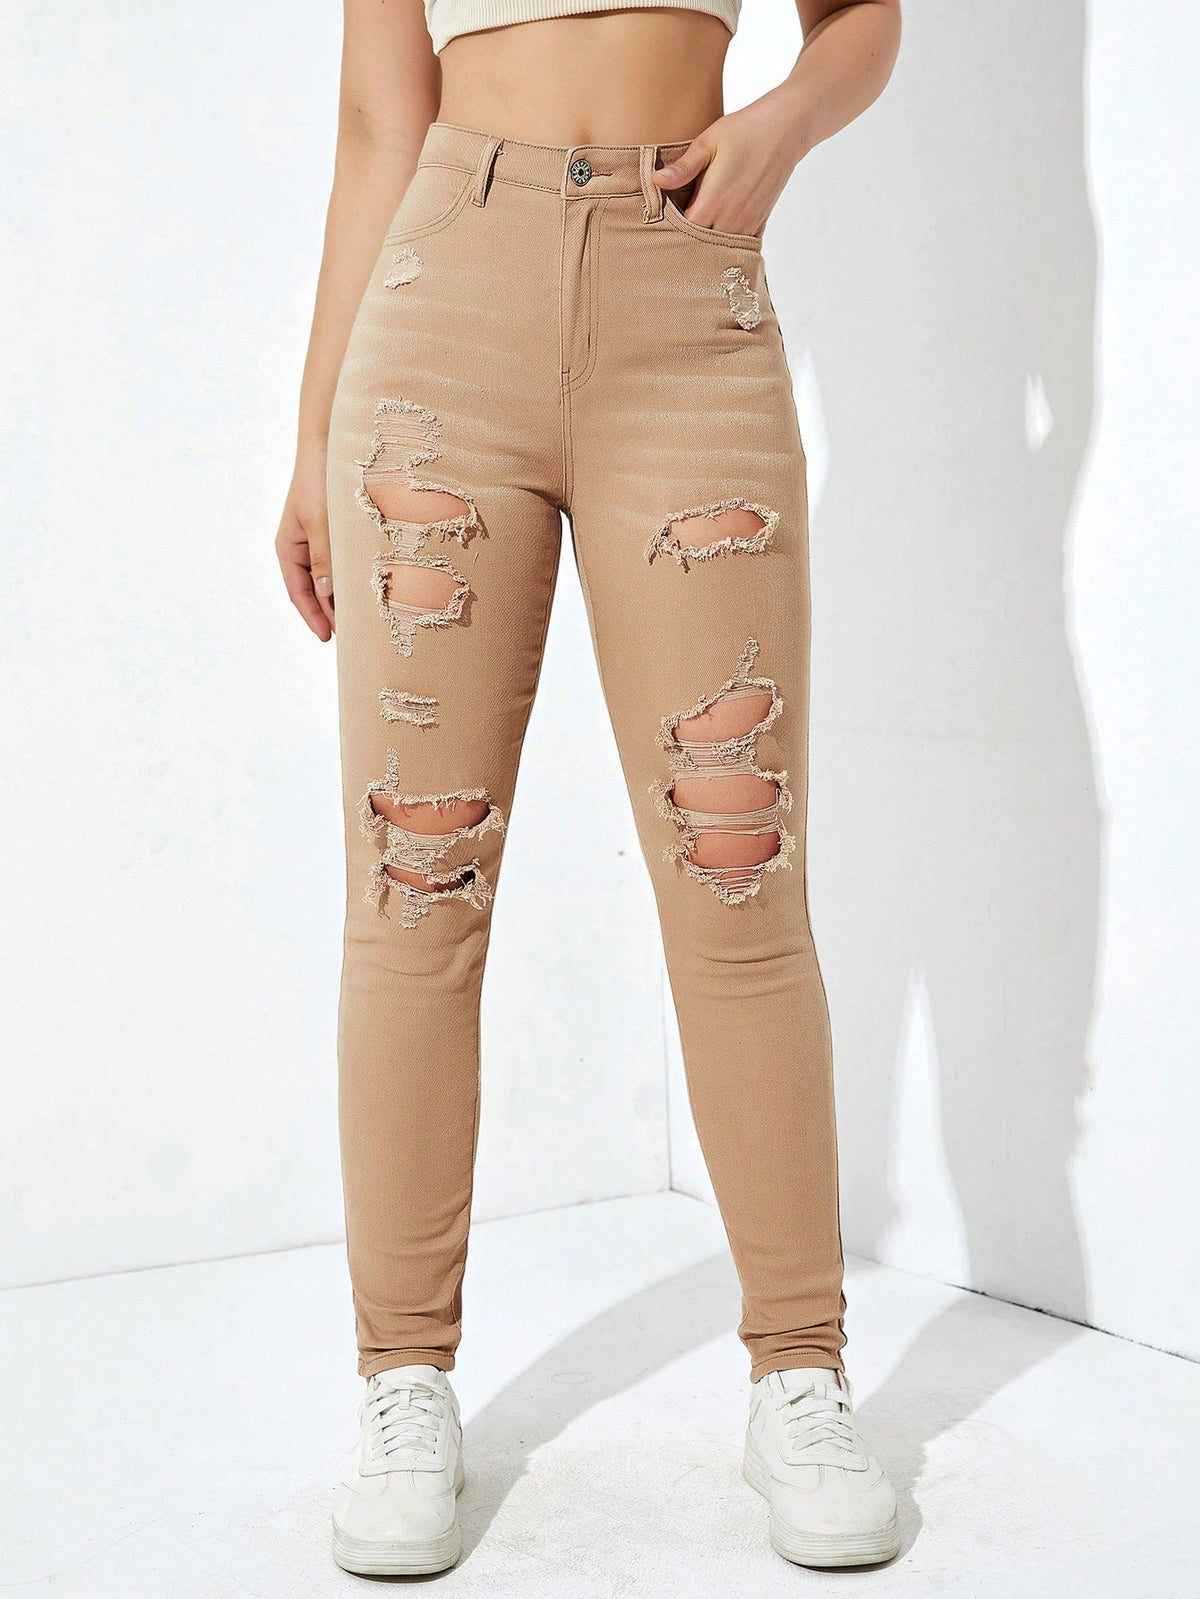 Ripped Skinny Jeans with High Waist